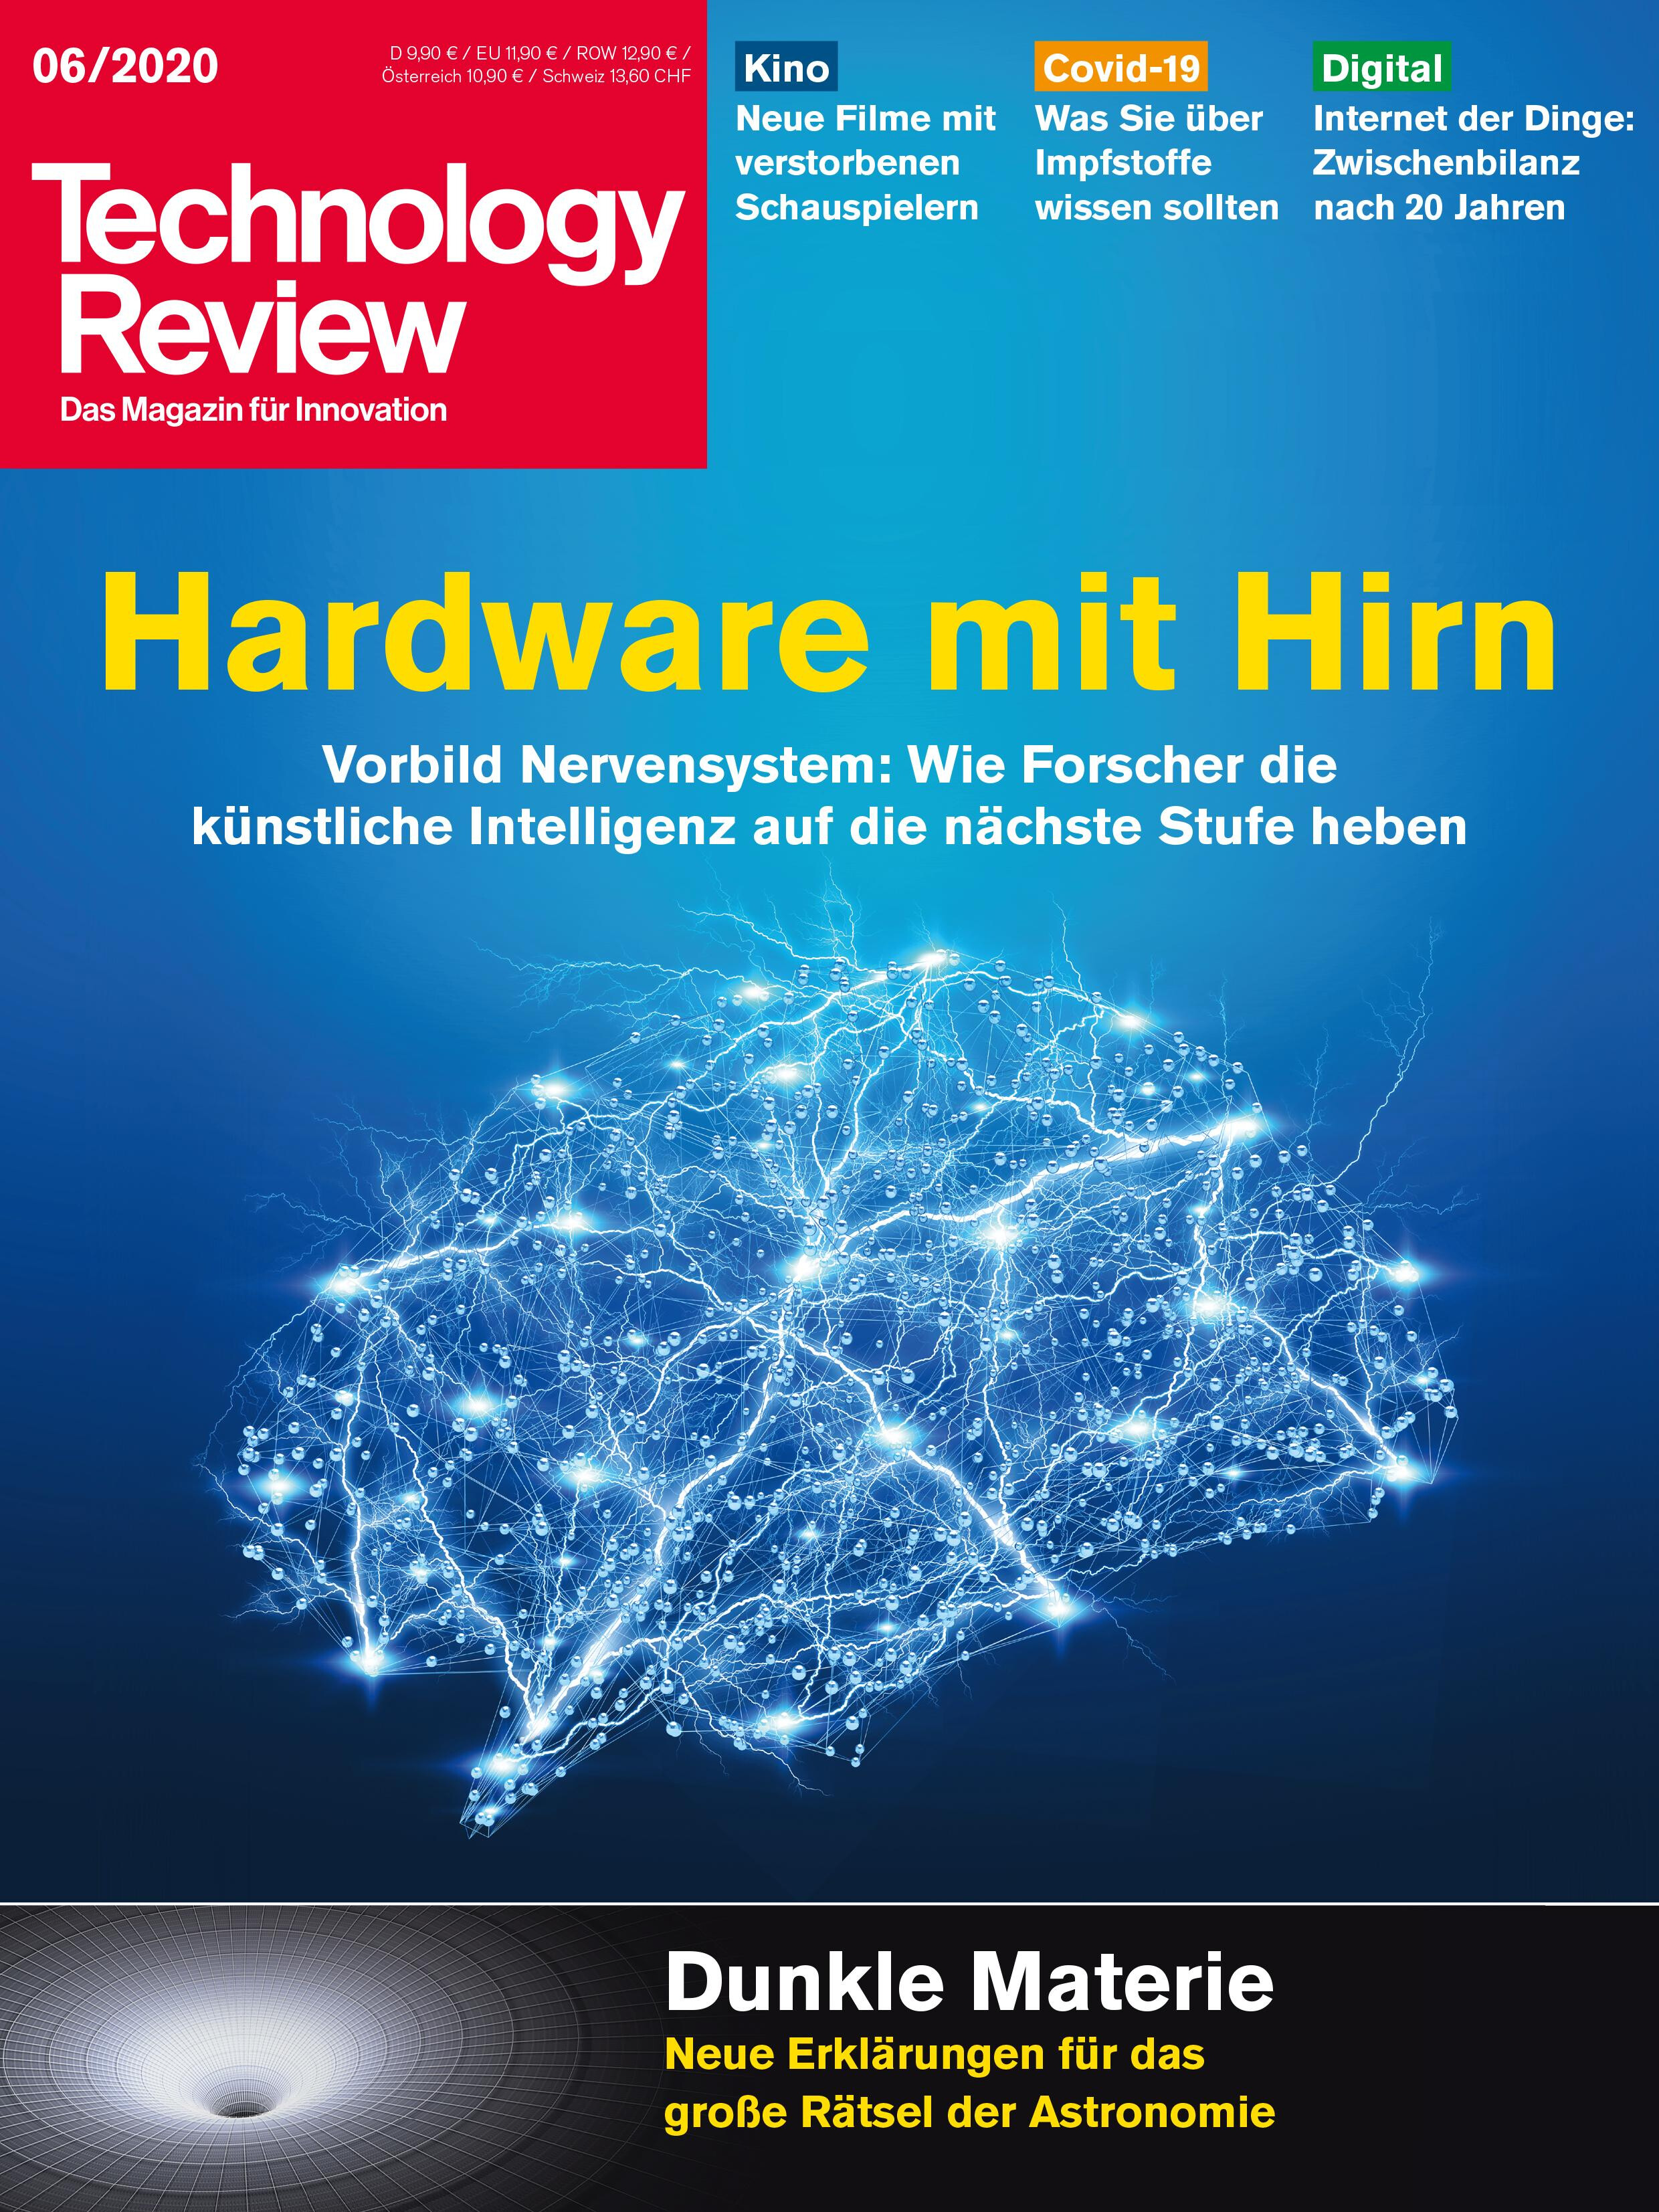 Technology Review 06/2020